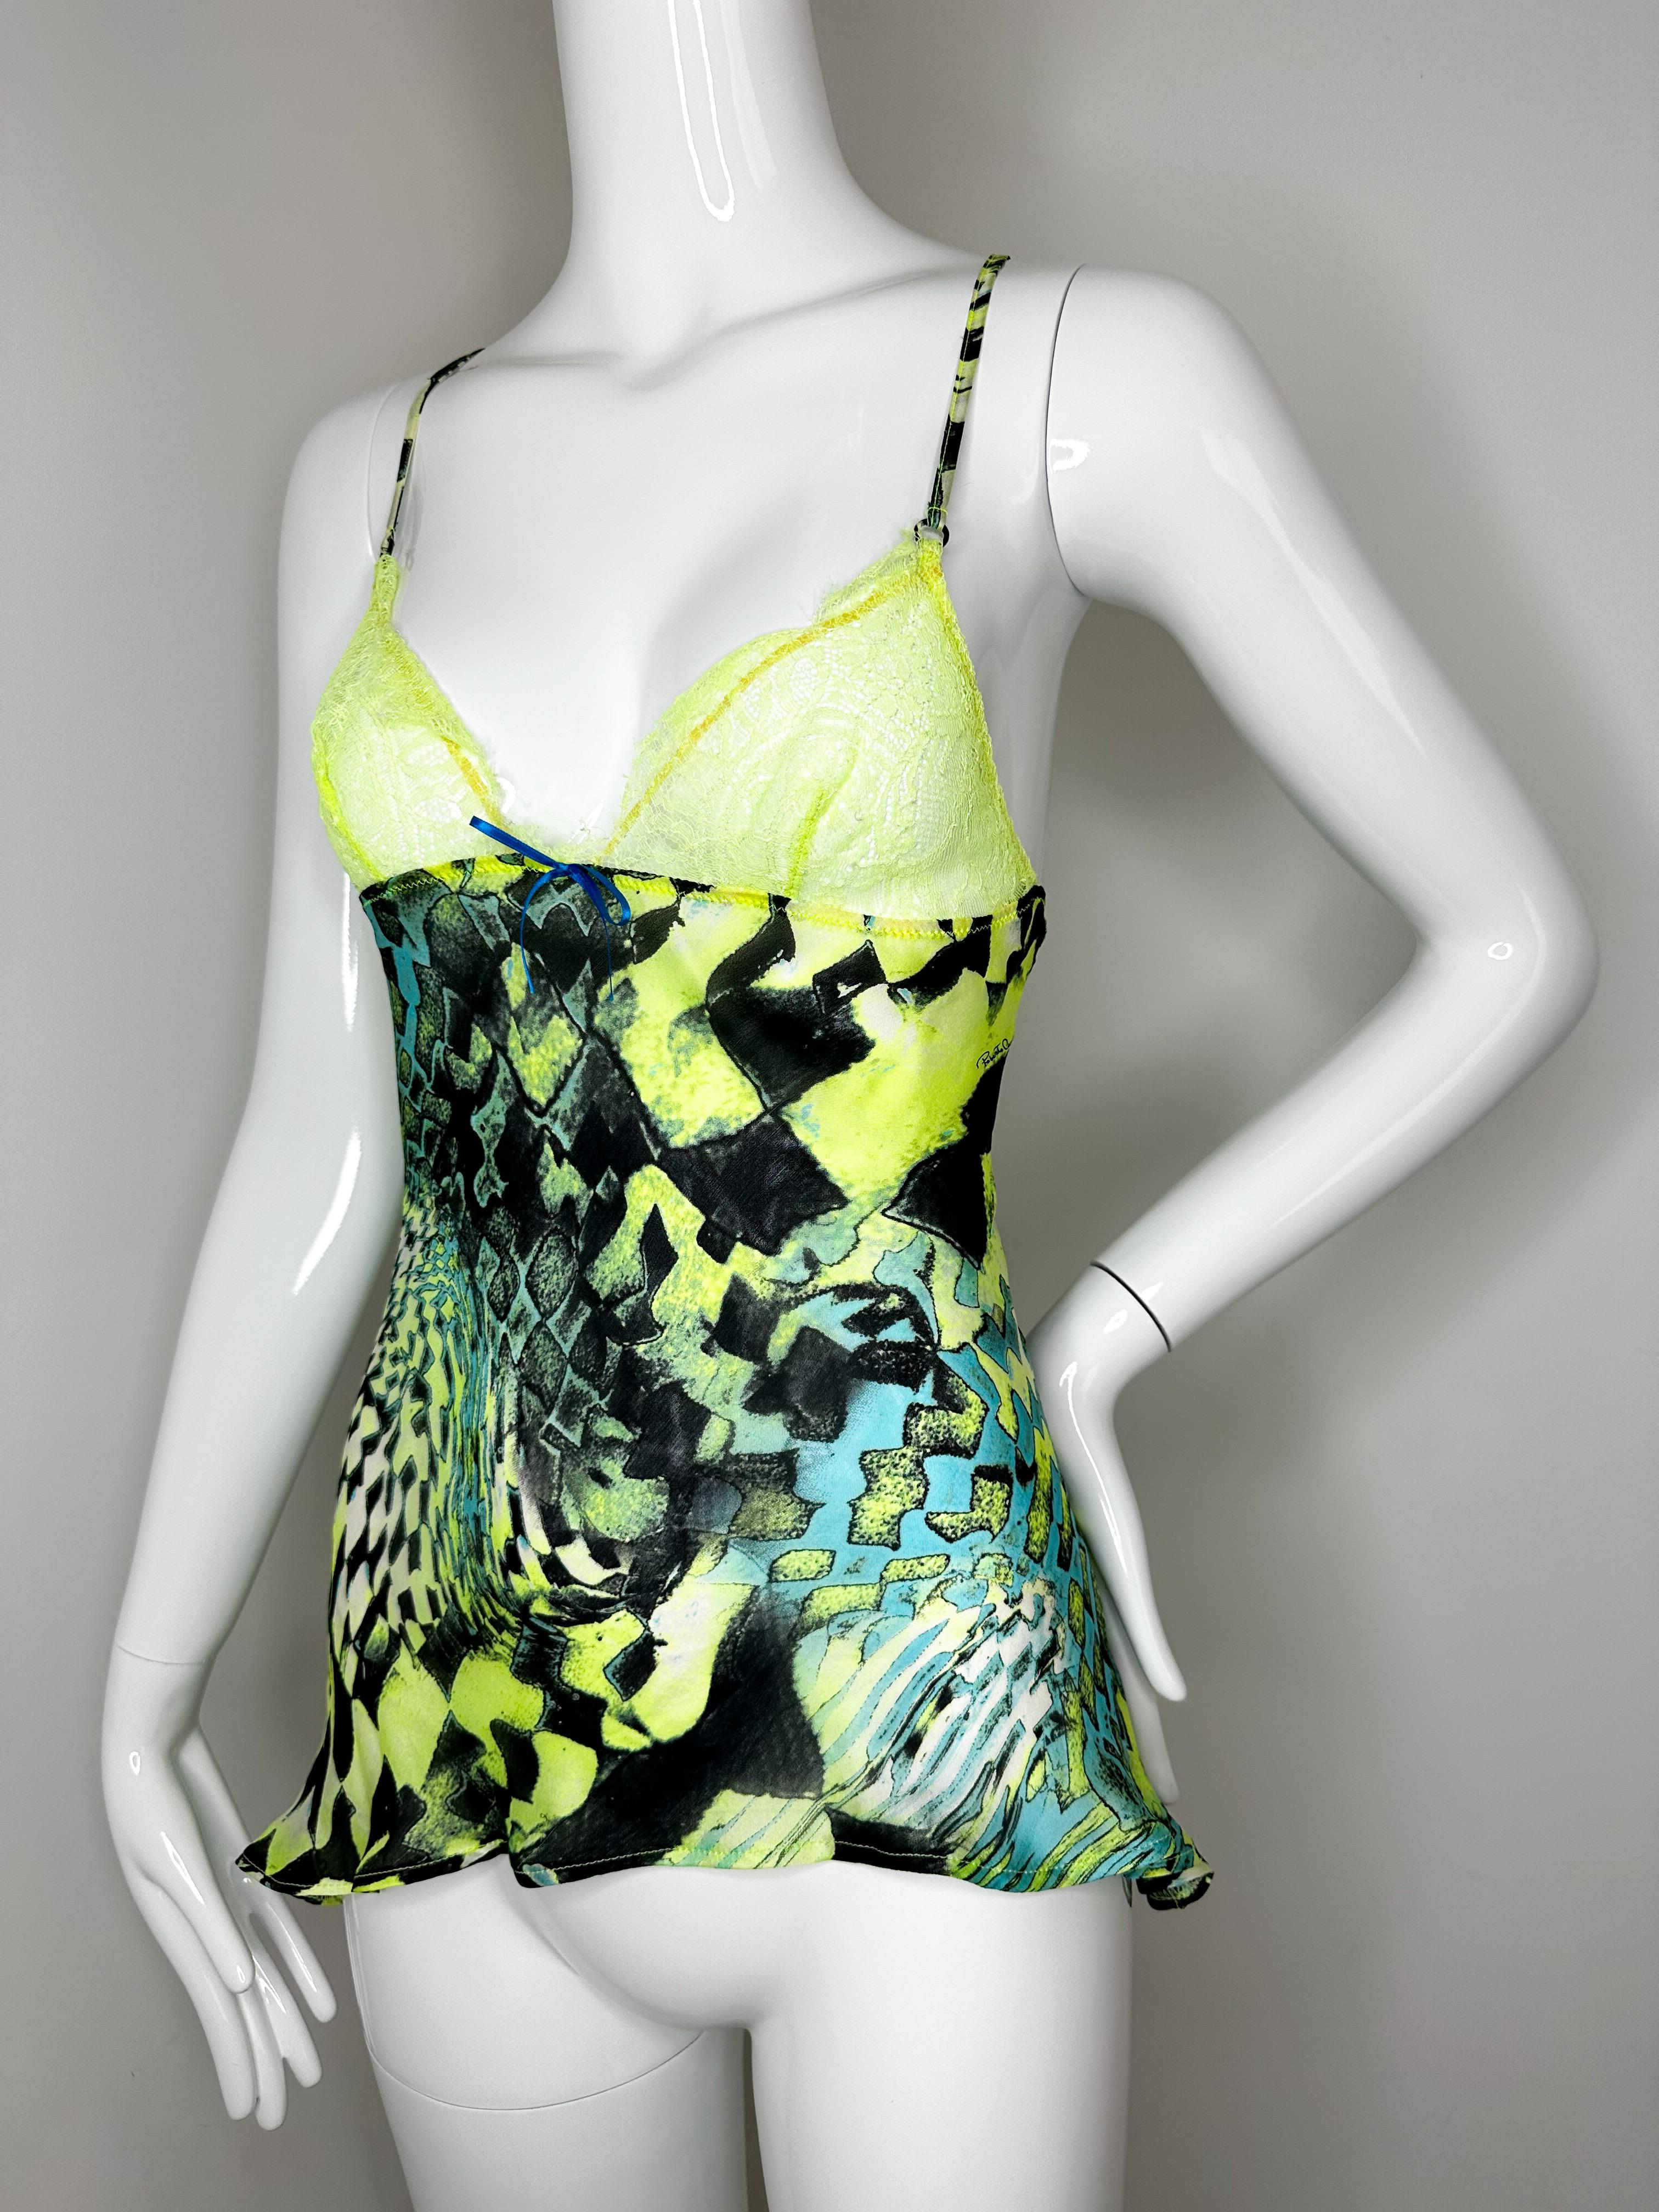 Roberto Cavalli 2003 psychedelic print silk camisole  In Good Condition For Sale In Annandale, VA